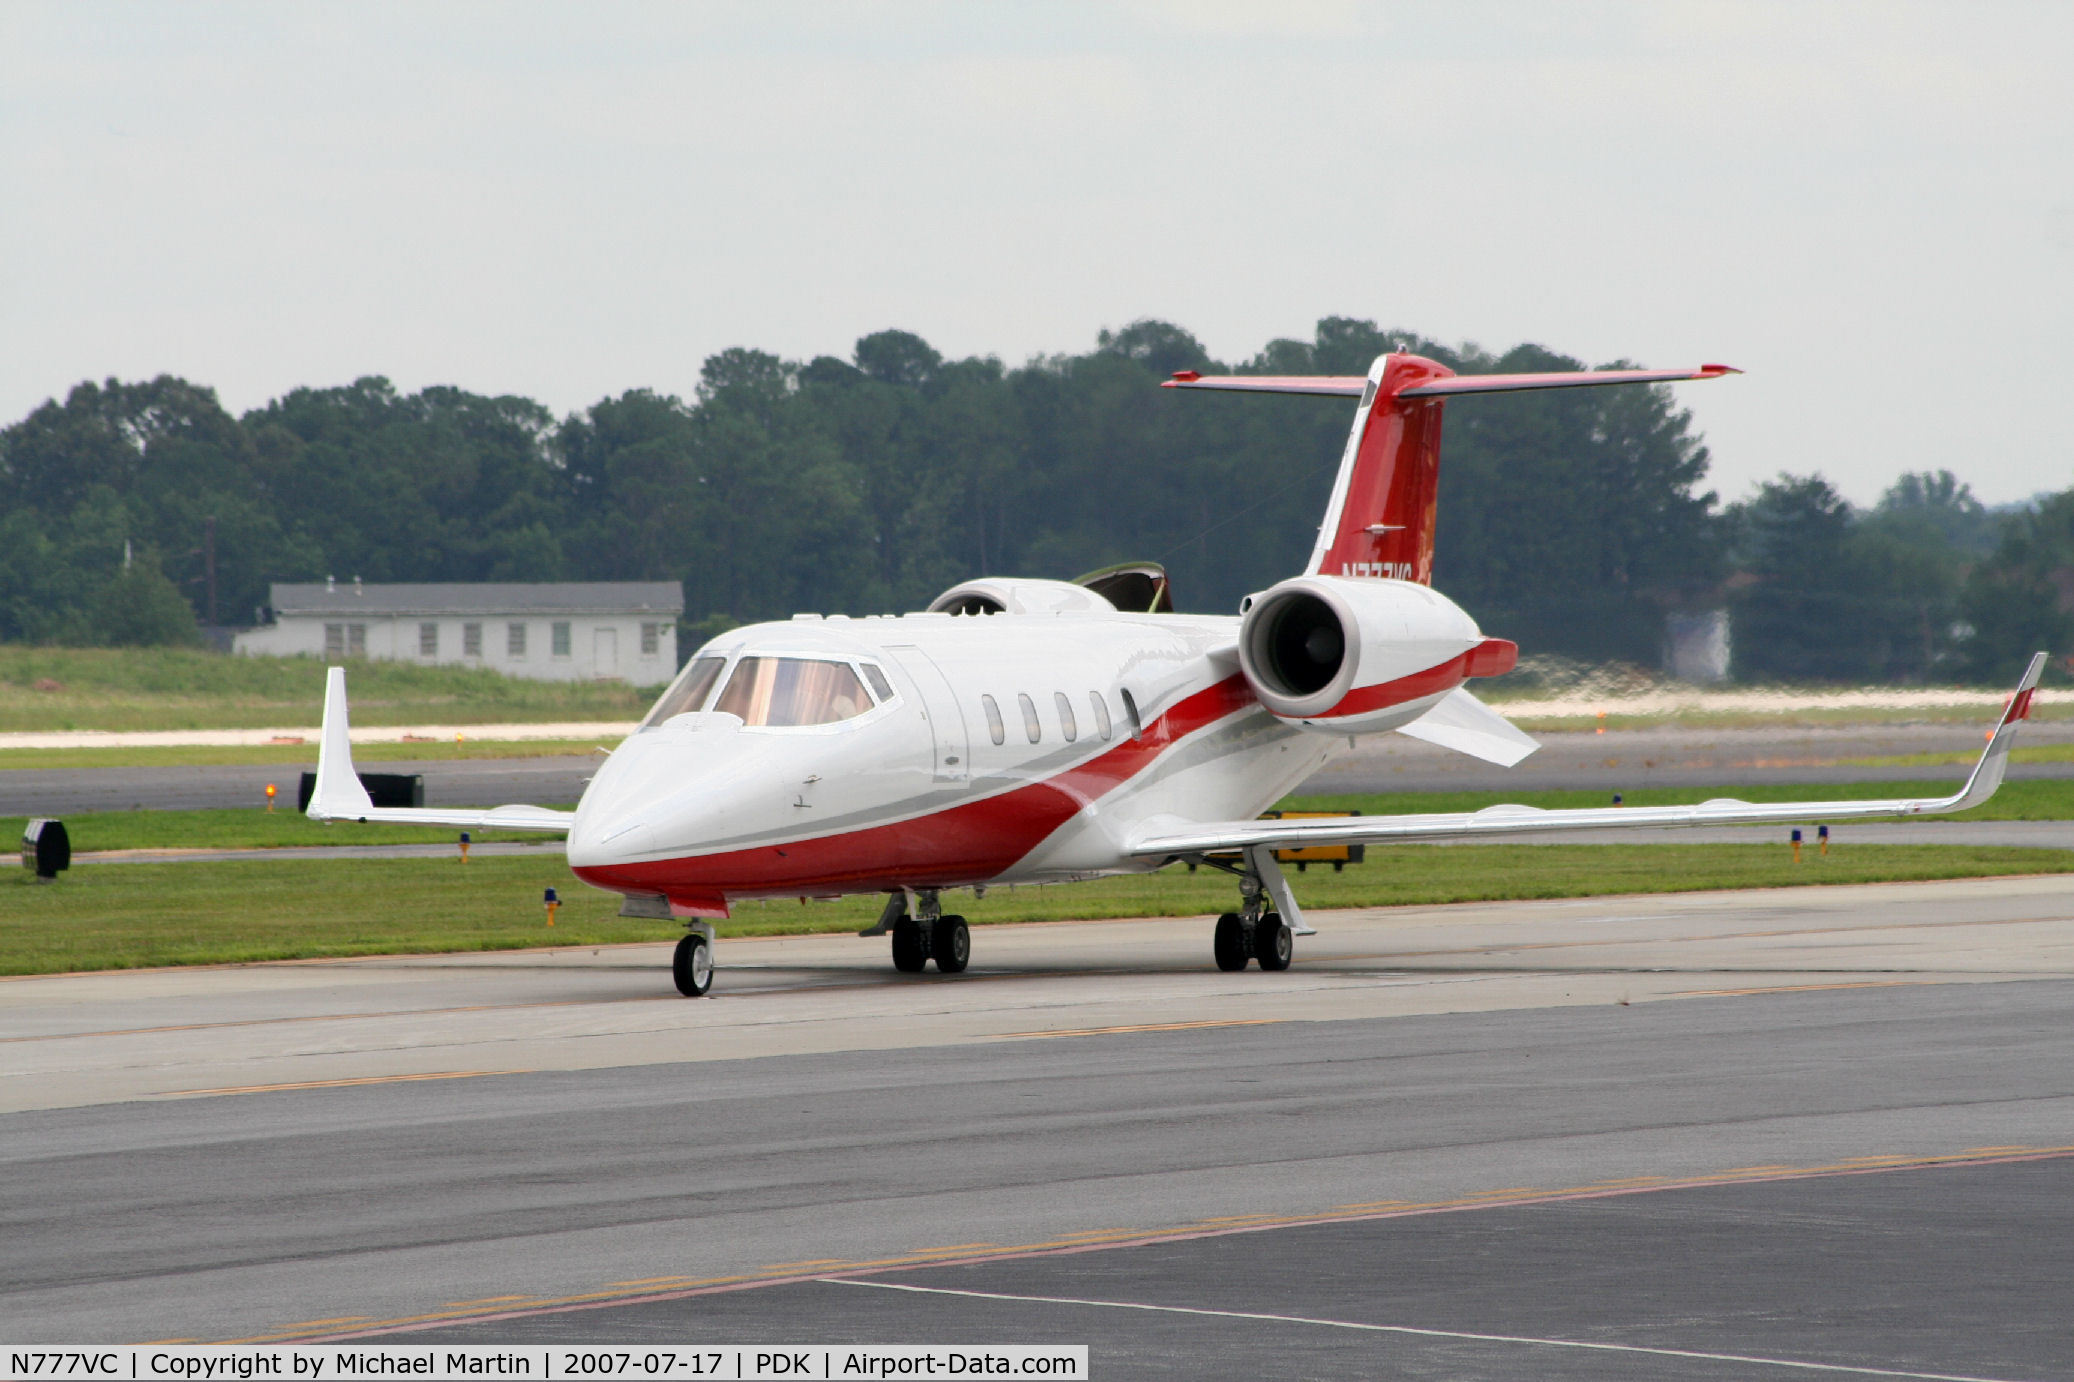 N777VC, 2007 Learjet 60 C/N 318, Taxing to Epps Air Service